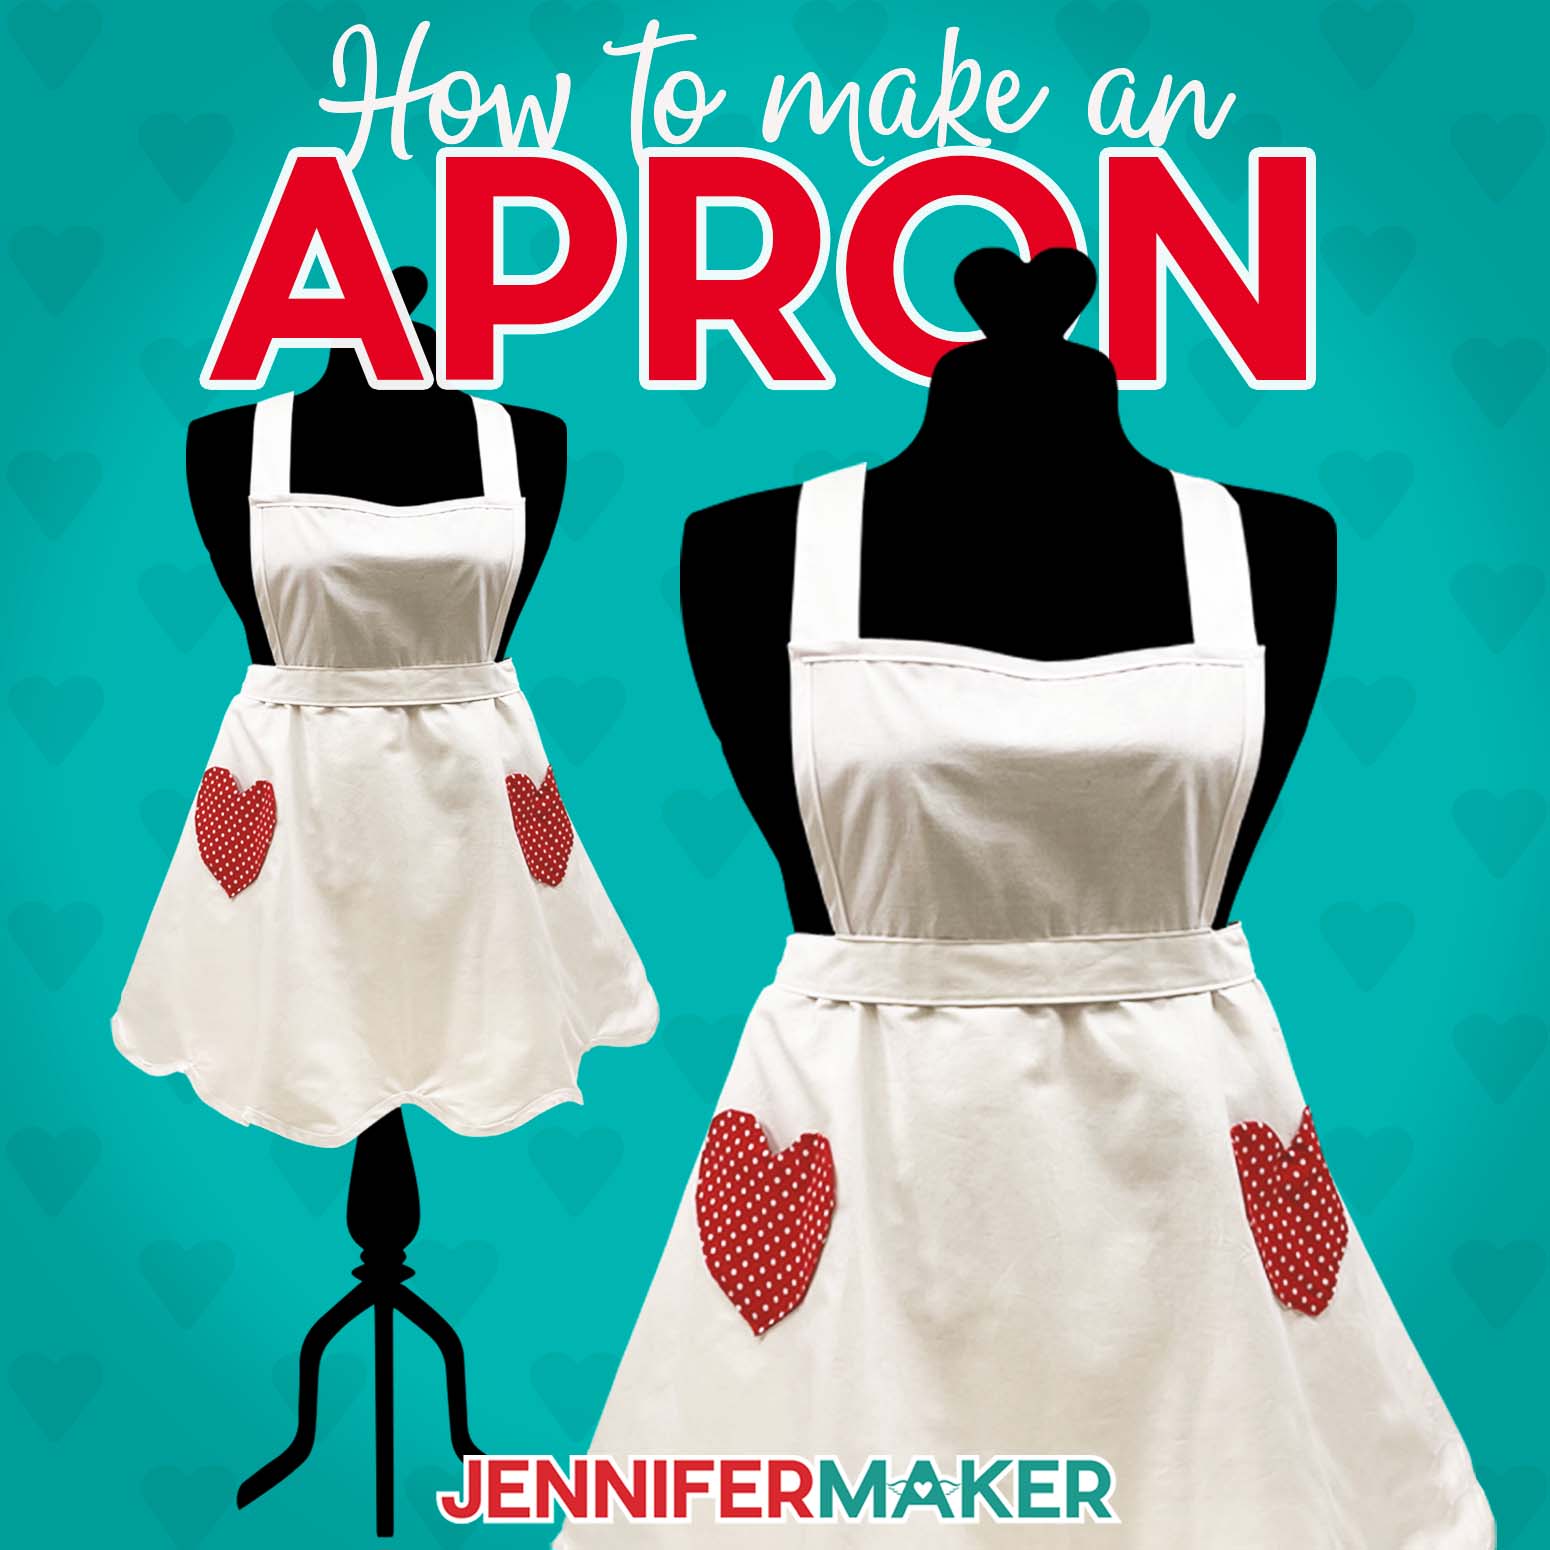 Two mannequins displaying vintage white aprons with red heart-shaped pockets made using a JenniferMaker tutorial on how to make an apron.